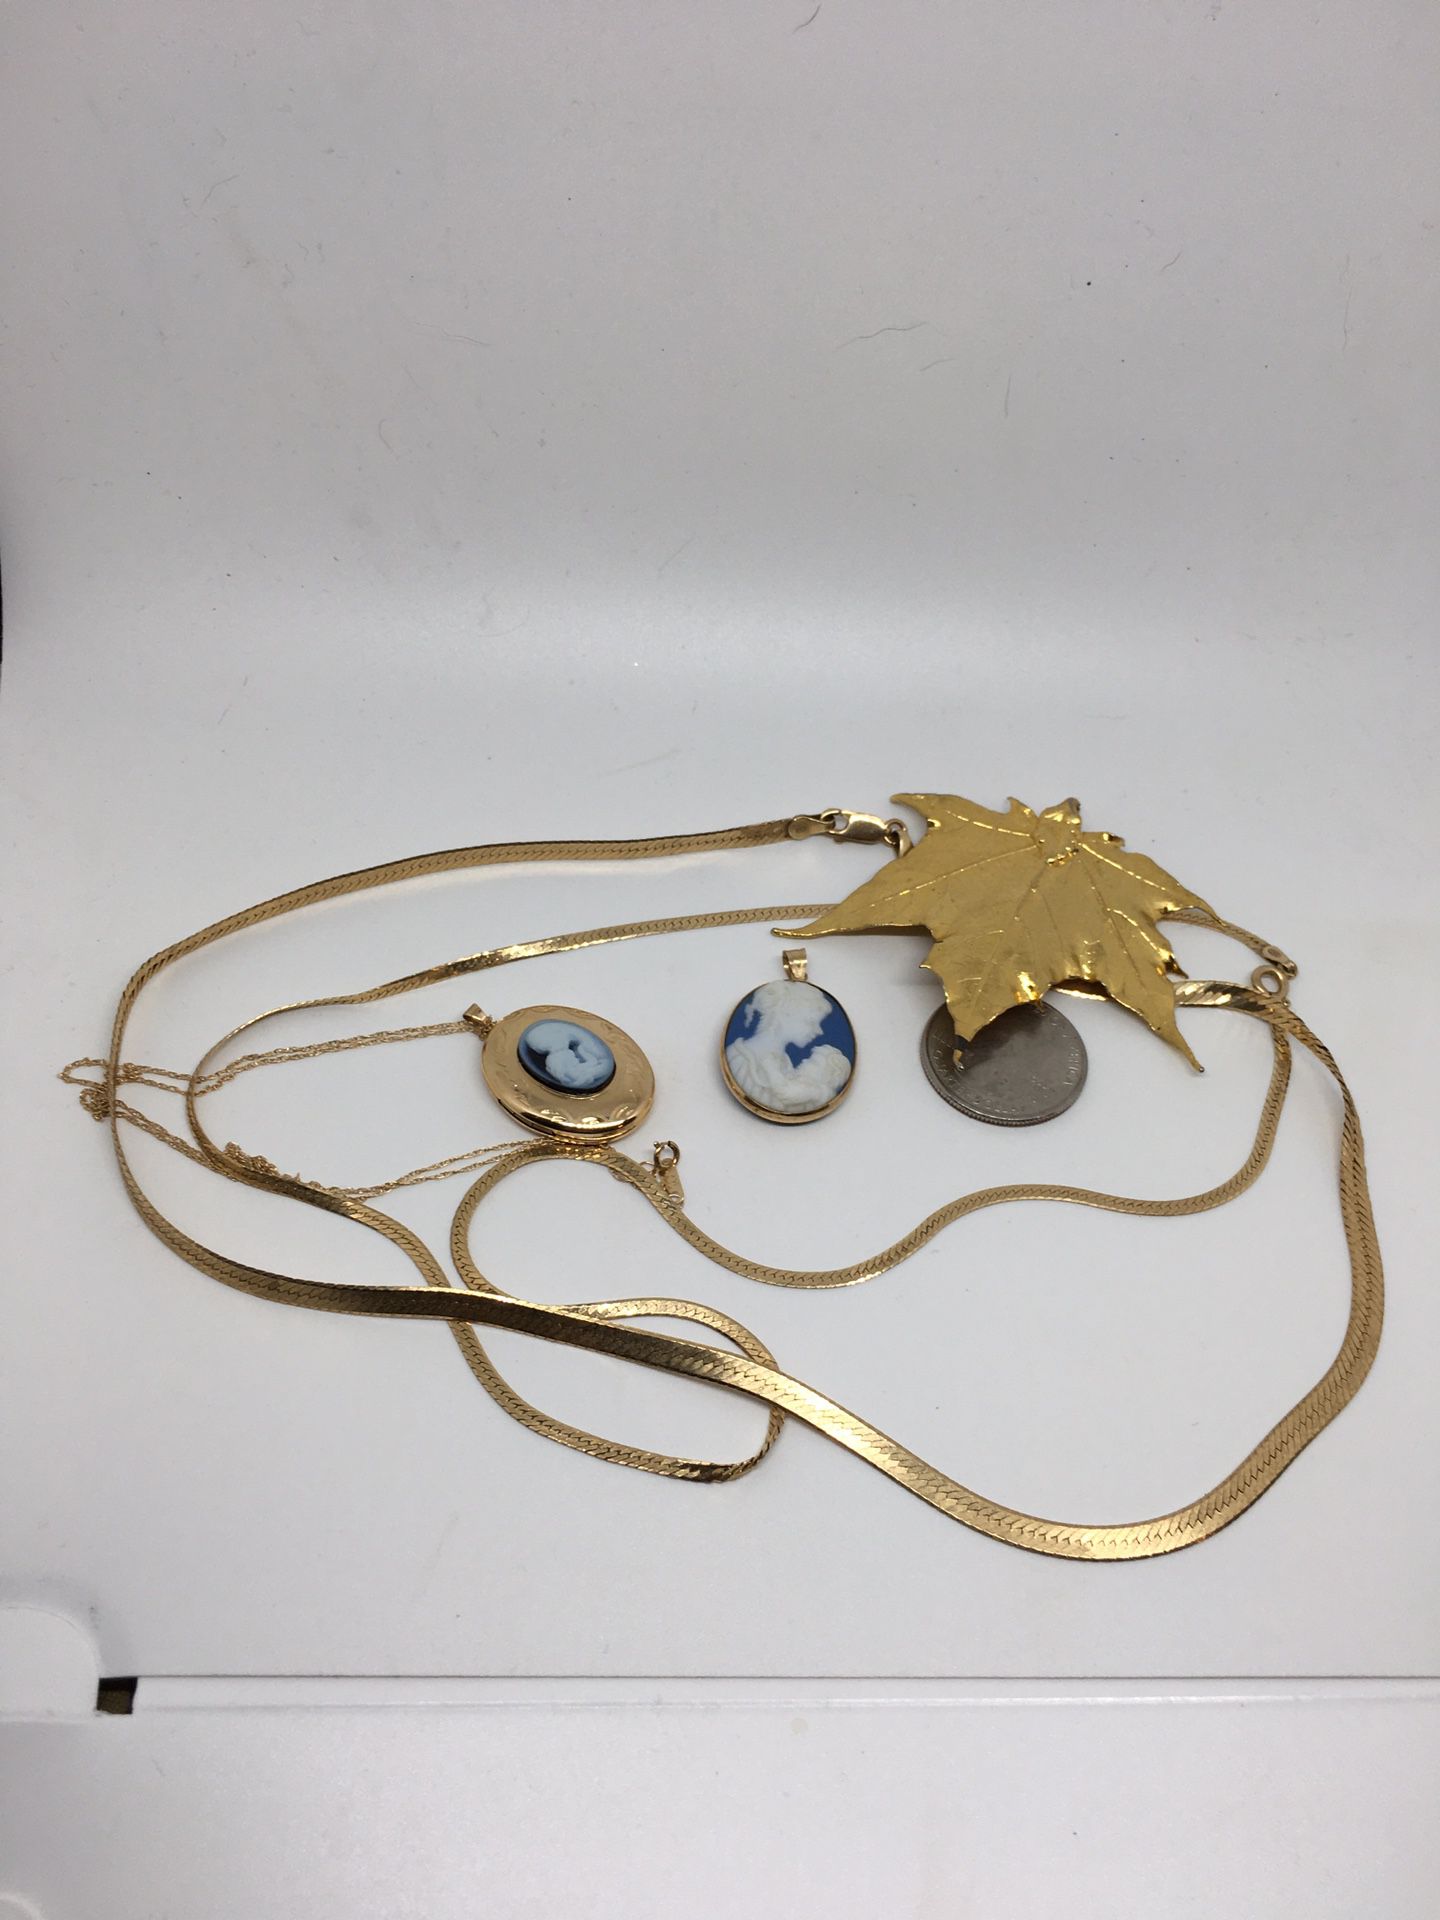 Lot 22 Grams Wearable 14K Yellow Gold Necklaces + 24K Leaf + 10K Cameo Pendant